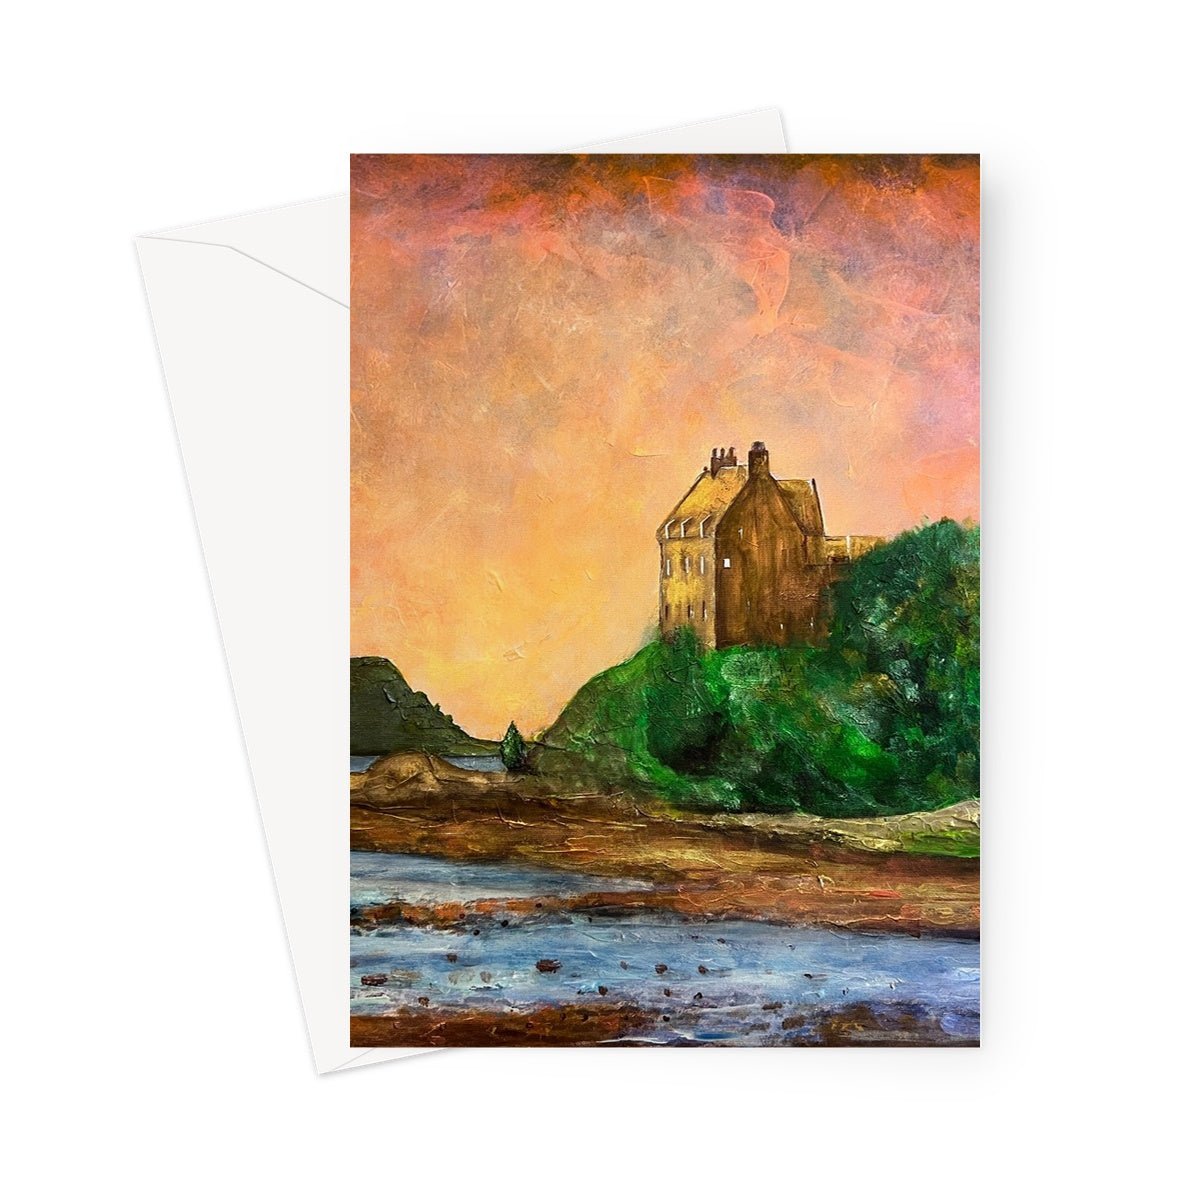 Duntrune Castle Art Gifts Greeting Card-Greetings Cards-Scottish Castles Art Gallery-5"x7"-10 Cards-Paintings, Prints, Homeware, Art Gifts From Scotland By Scottish Artist Kevin Hunter